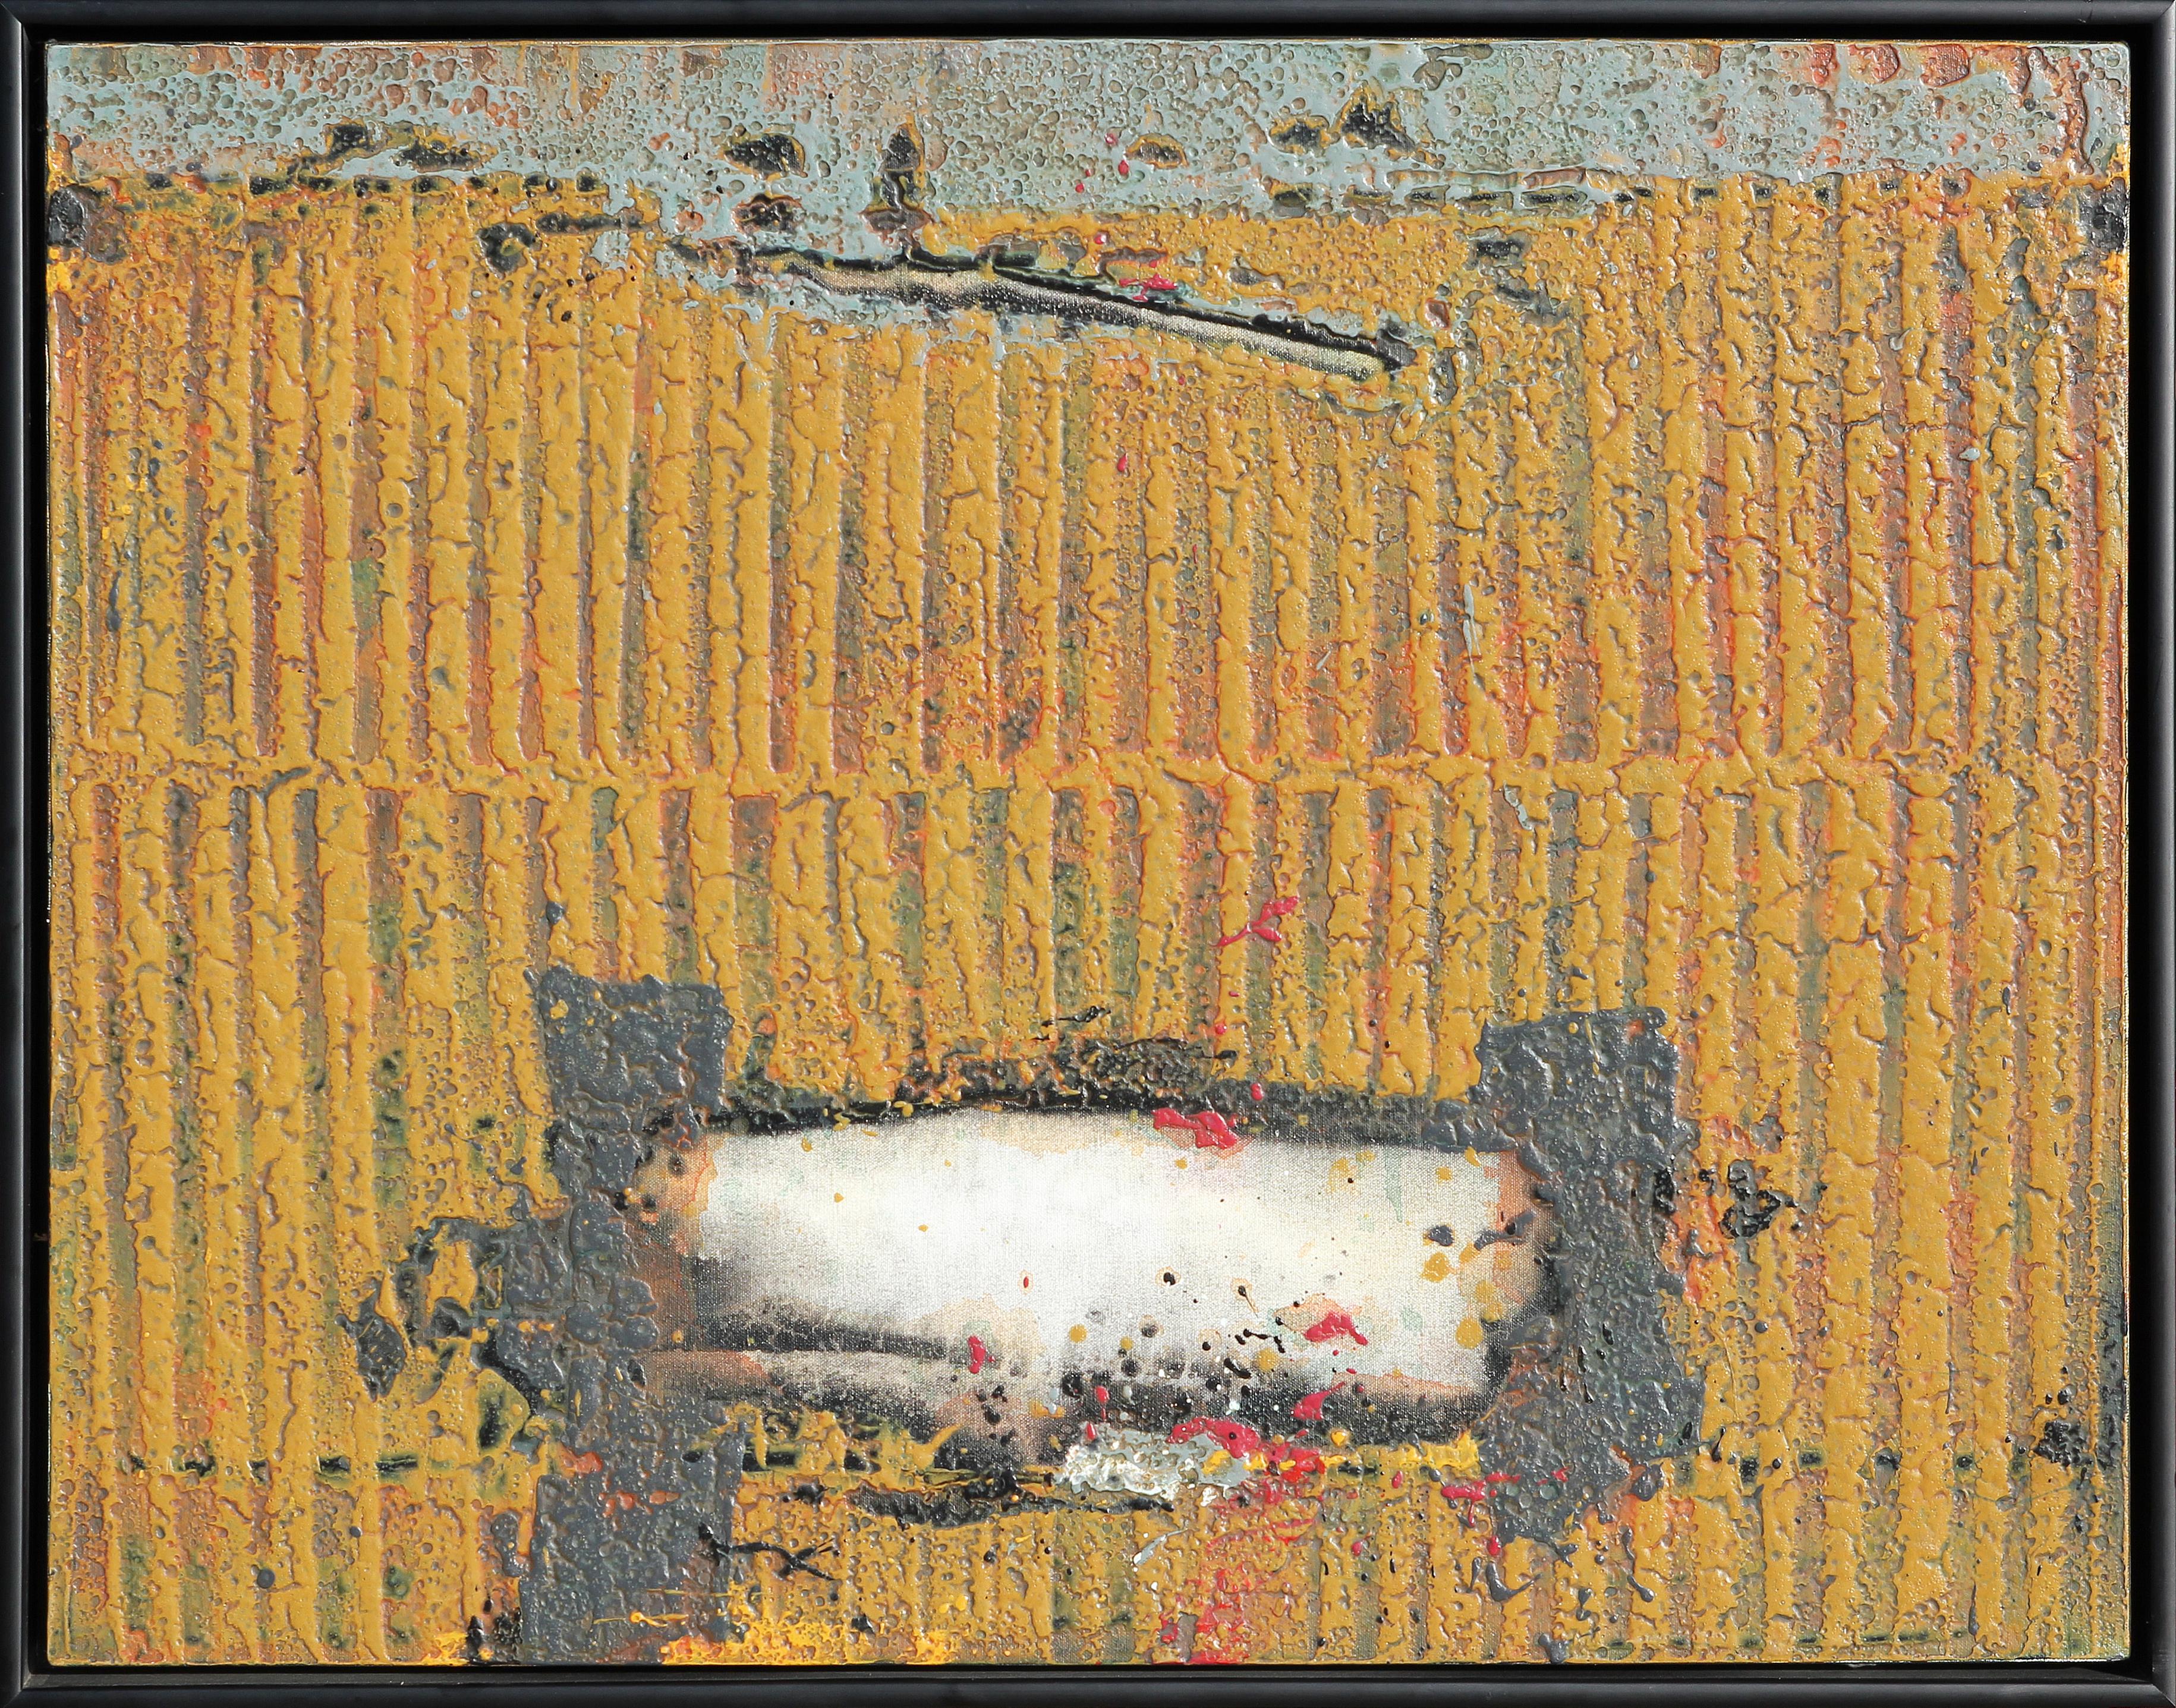 Steven Alexander Abstract Painting - "Subculture II" Yellow and Orange Stripes Textured Abstract Mixed Media Painting